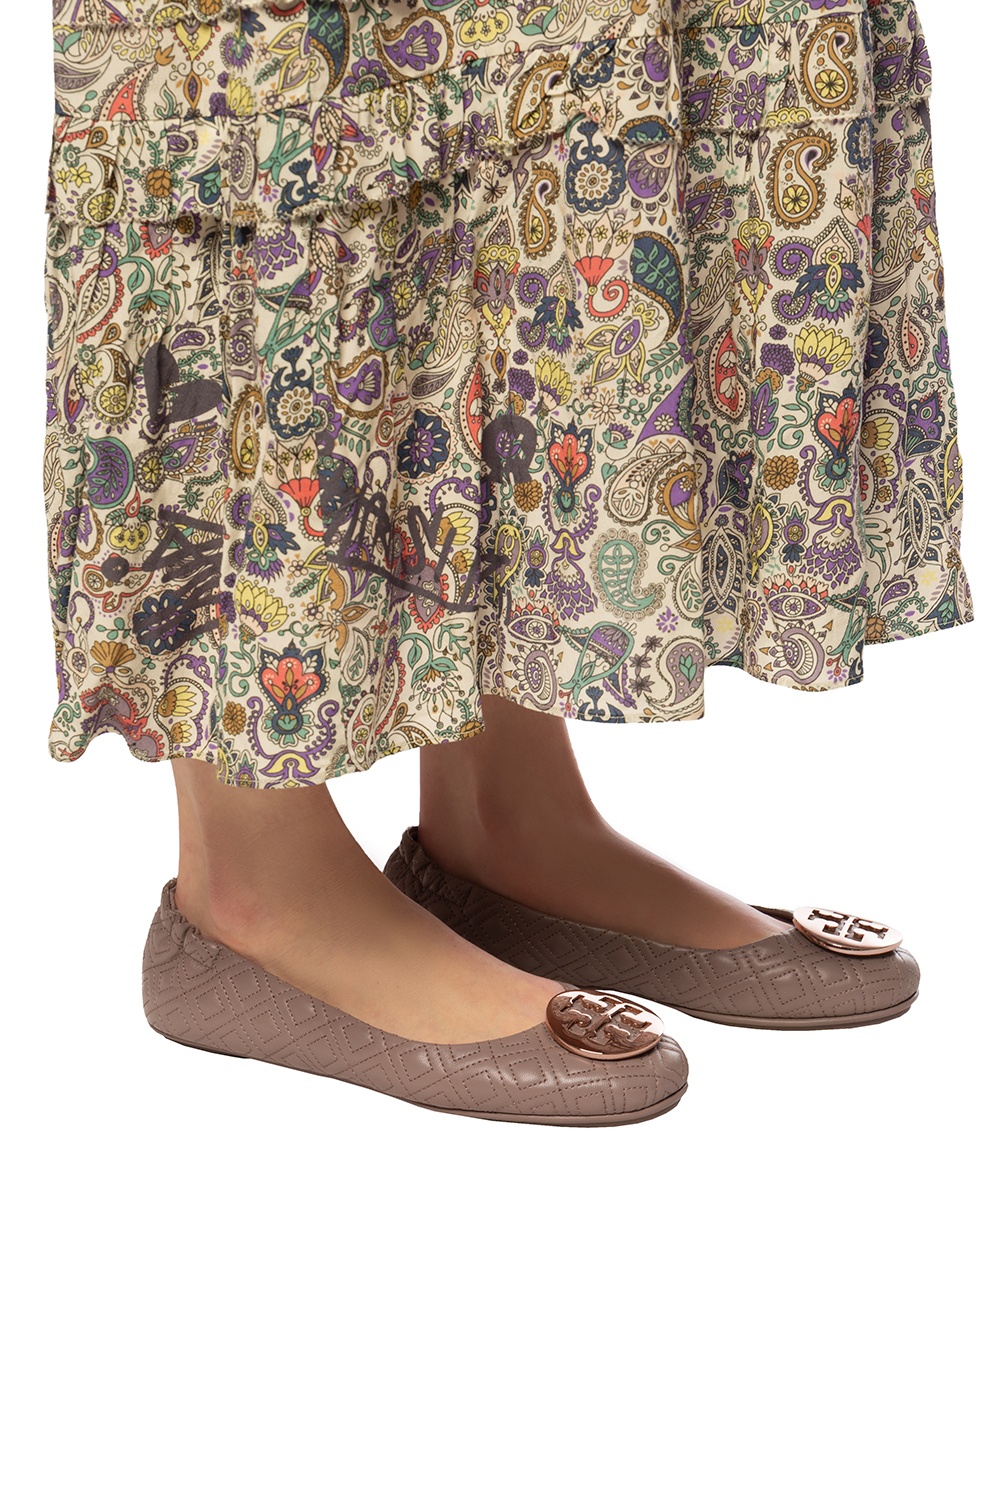 Women's Shoes | Tory Burch Leather ballet flats with logo | IetpShops |  Shoes CALL IT SPRING Daliaa 16184883 001